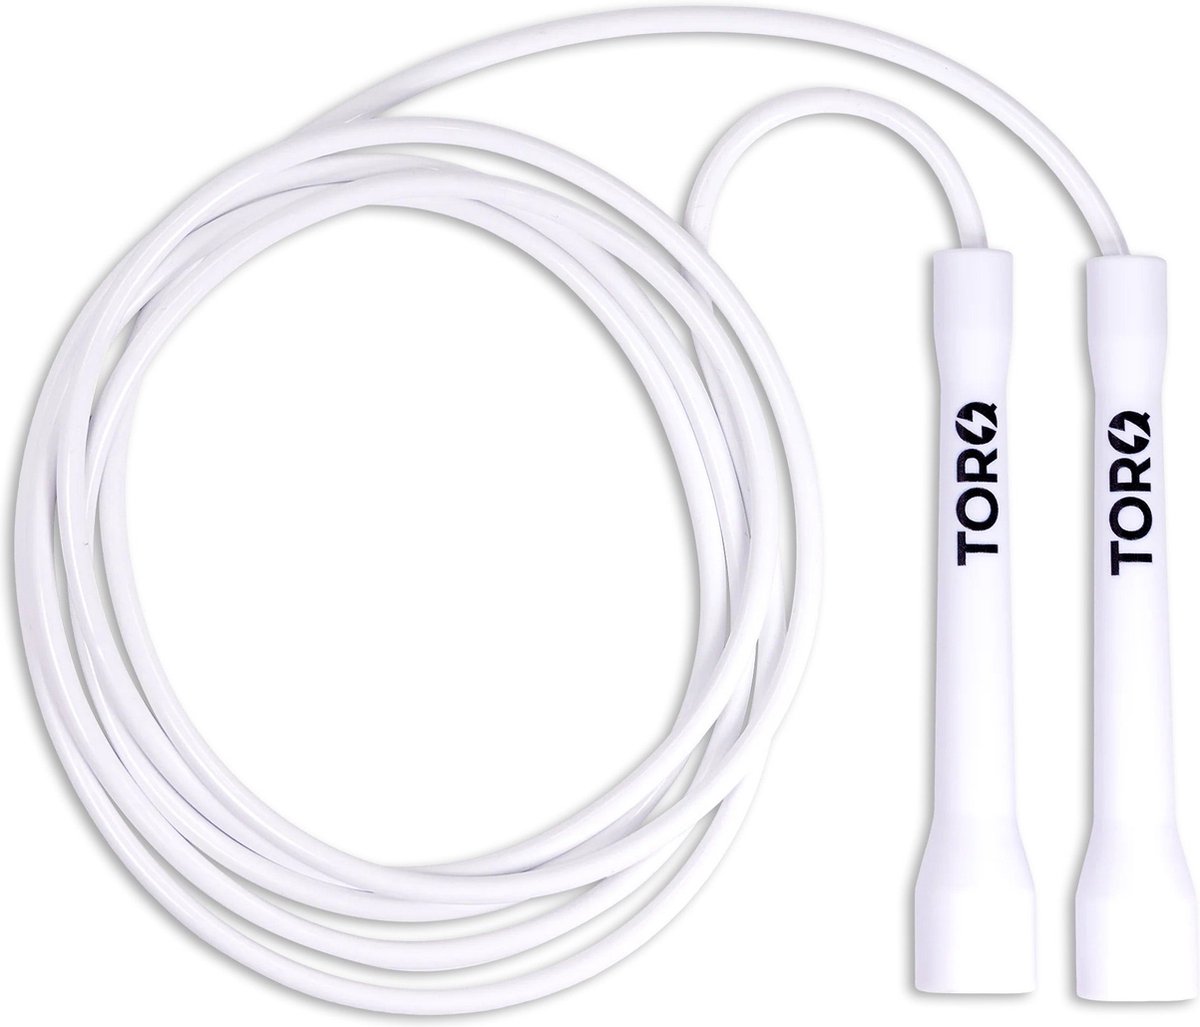 TORQ Jump rope Current - springtouw (white) 10ft (305cm) - ⌀5mm - 100gr - middlehandle